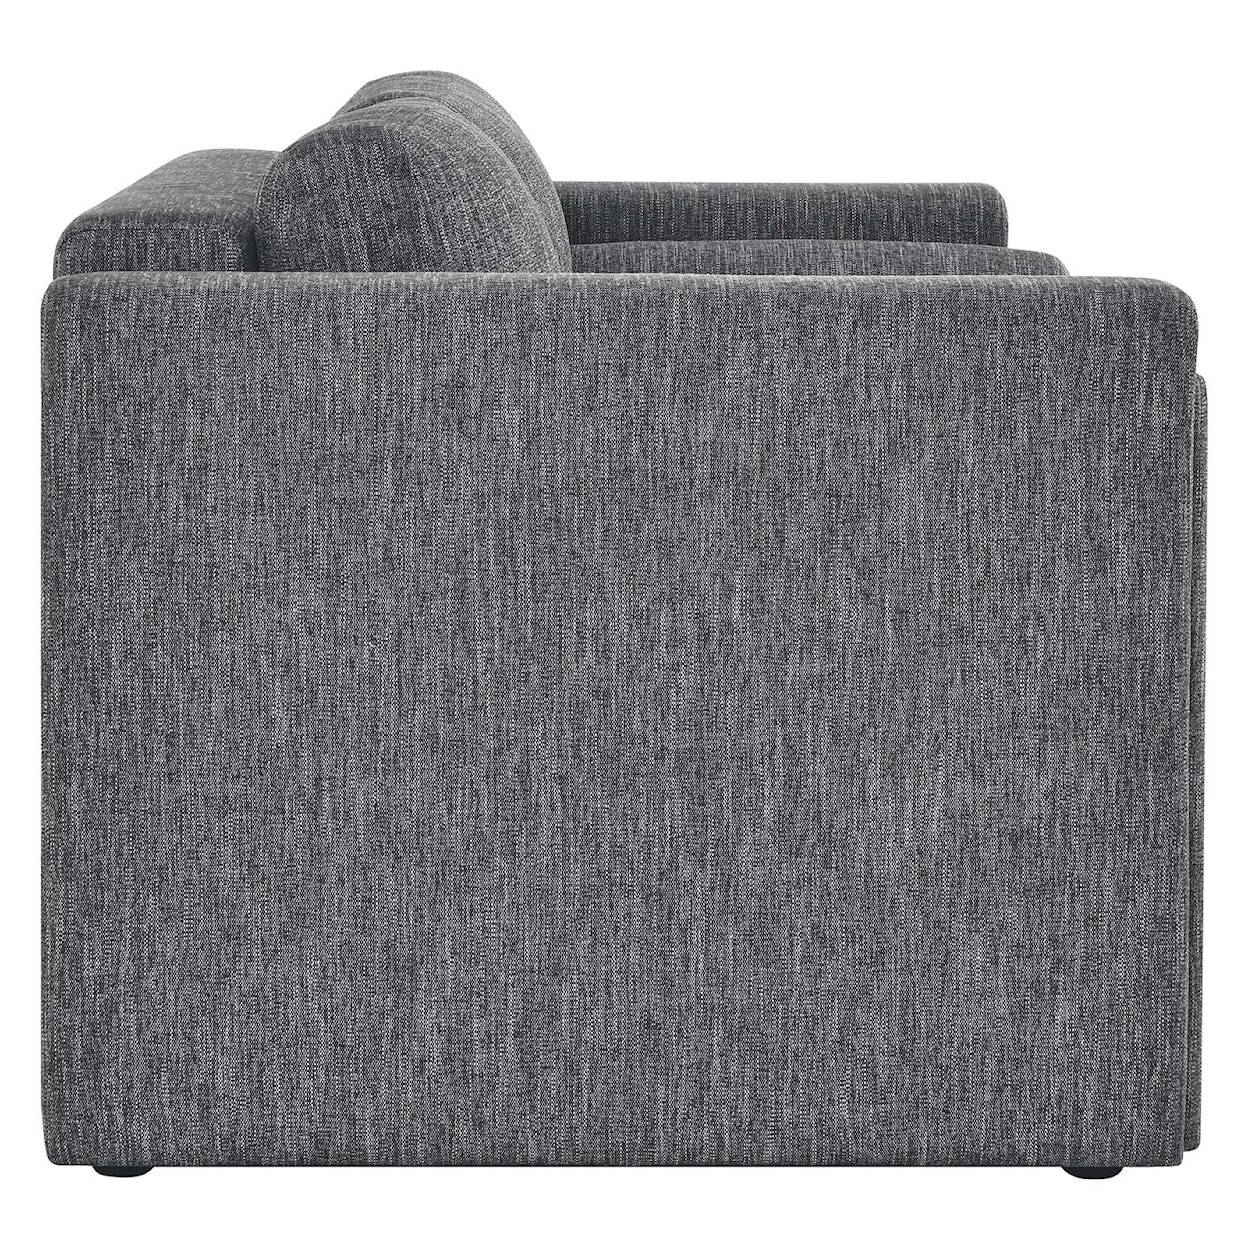 Modway Visible Loveseat